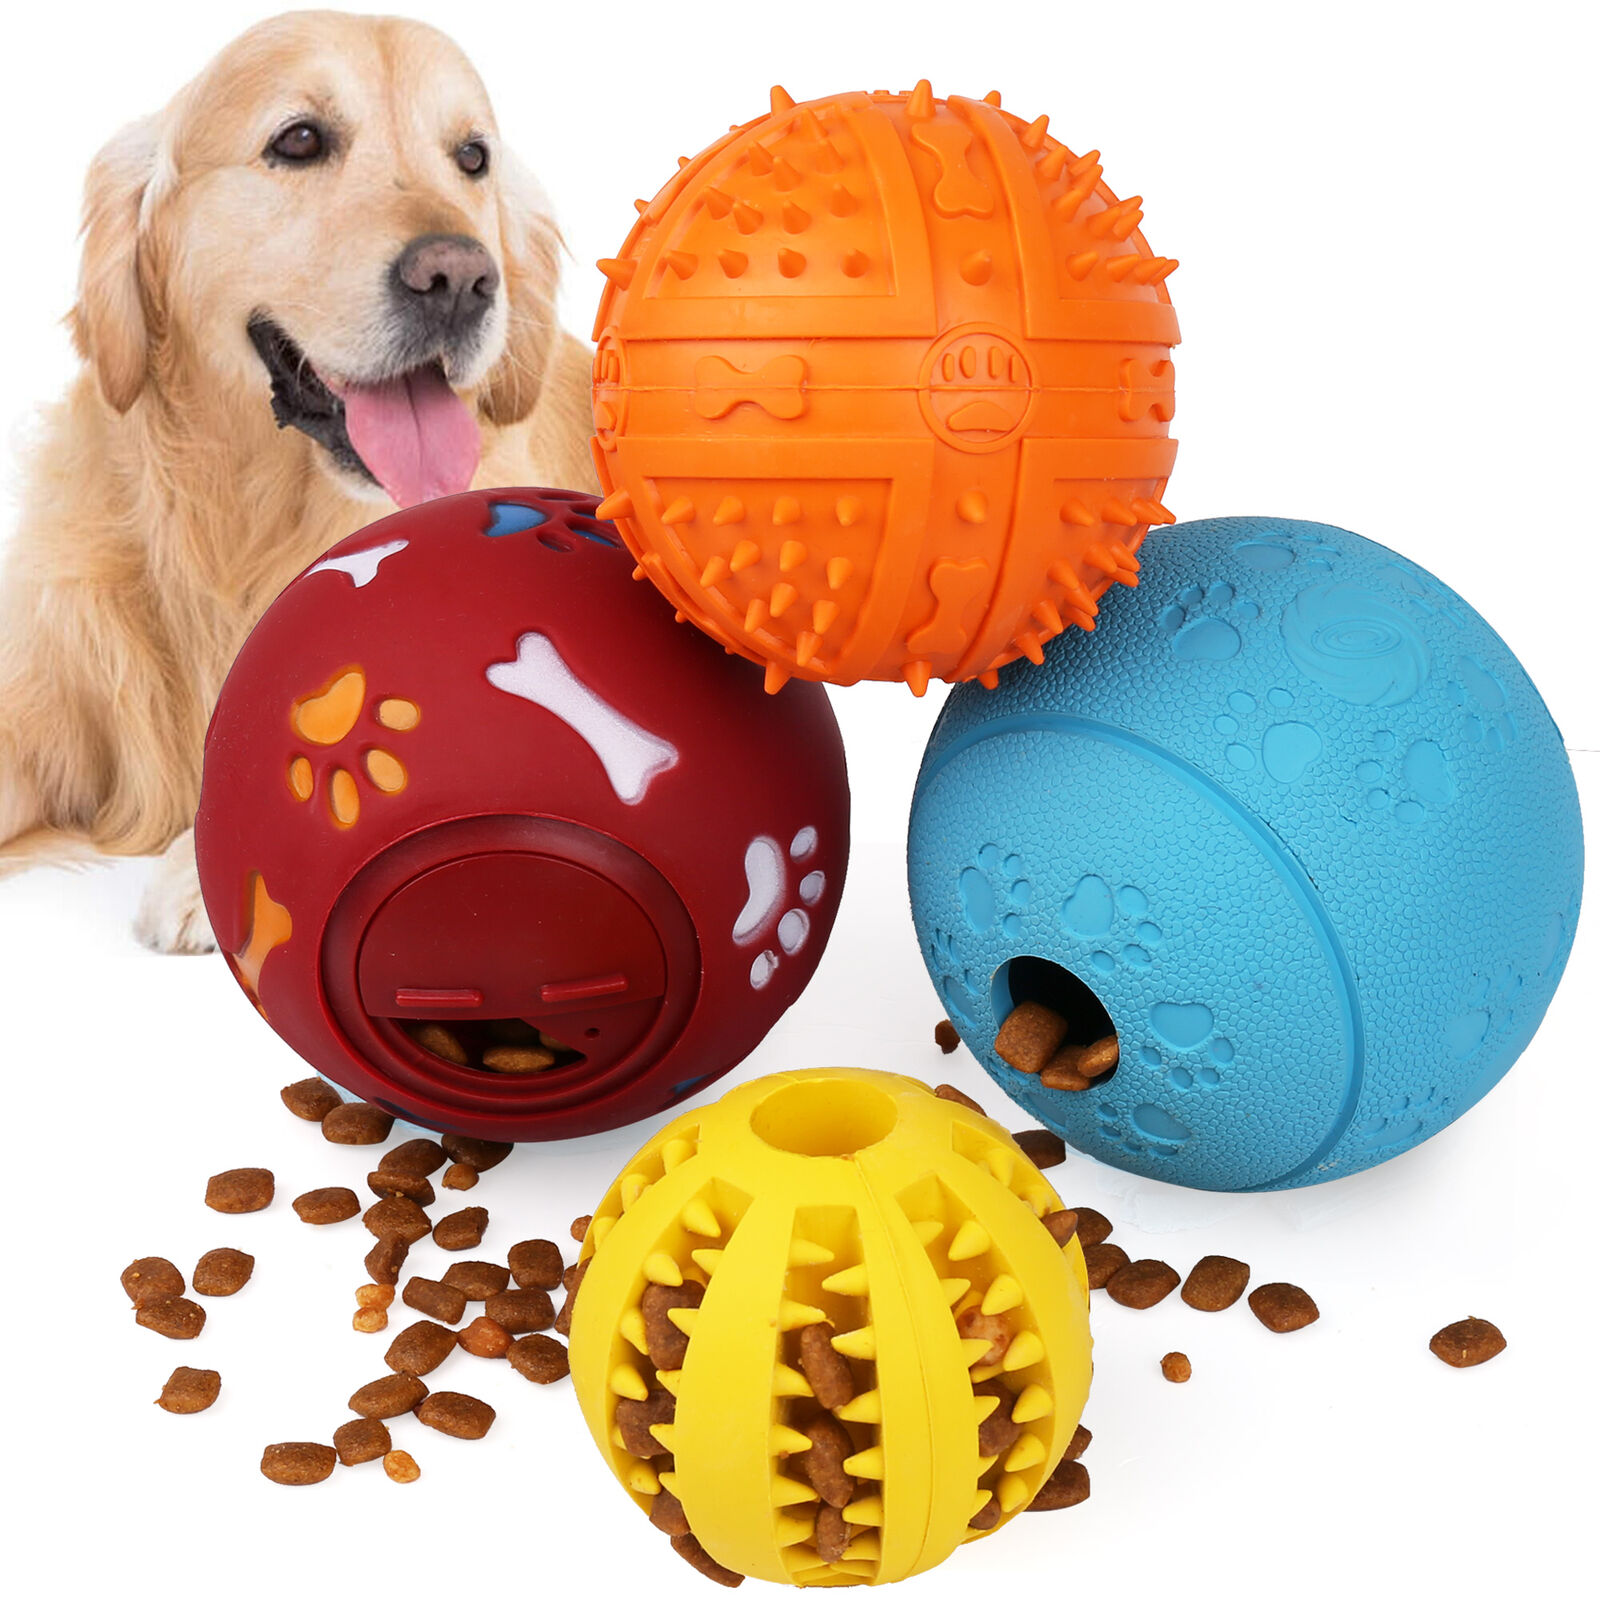 

4pcs Dog Treat Ball, Interactive Food Dispenser Puppy Puzzle Toys, Natural Rubber, For Tooth Cleaning, Iq Training, Chewing, Playing Toy